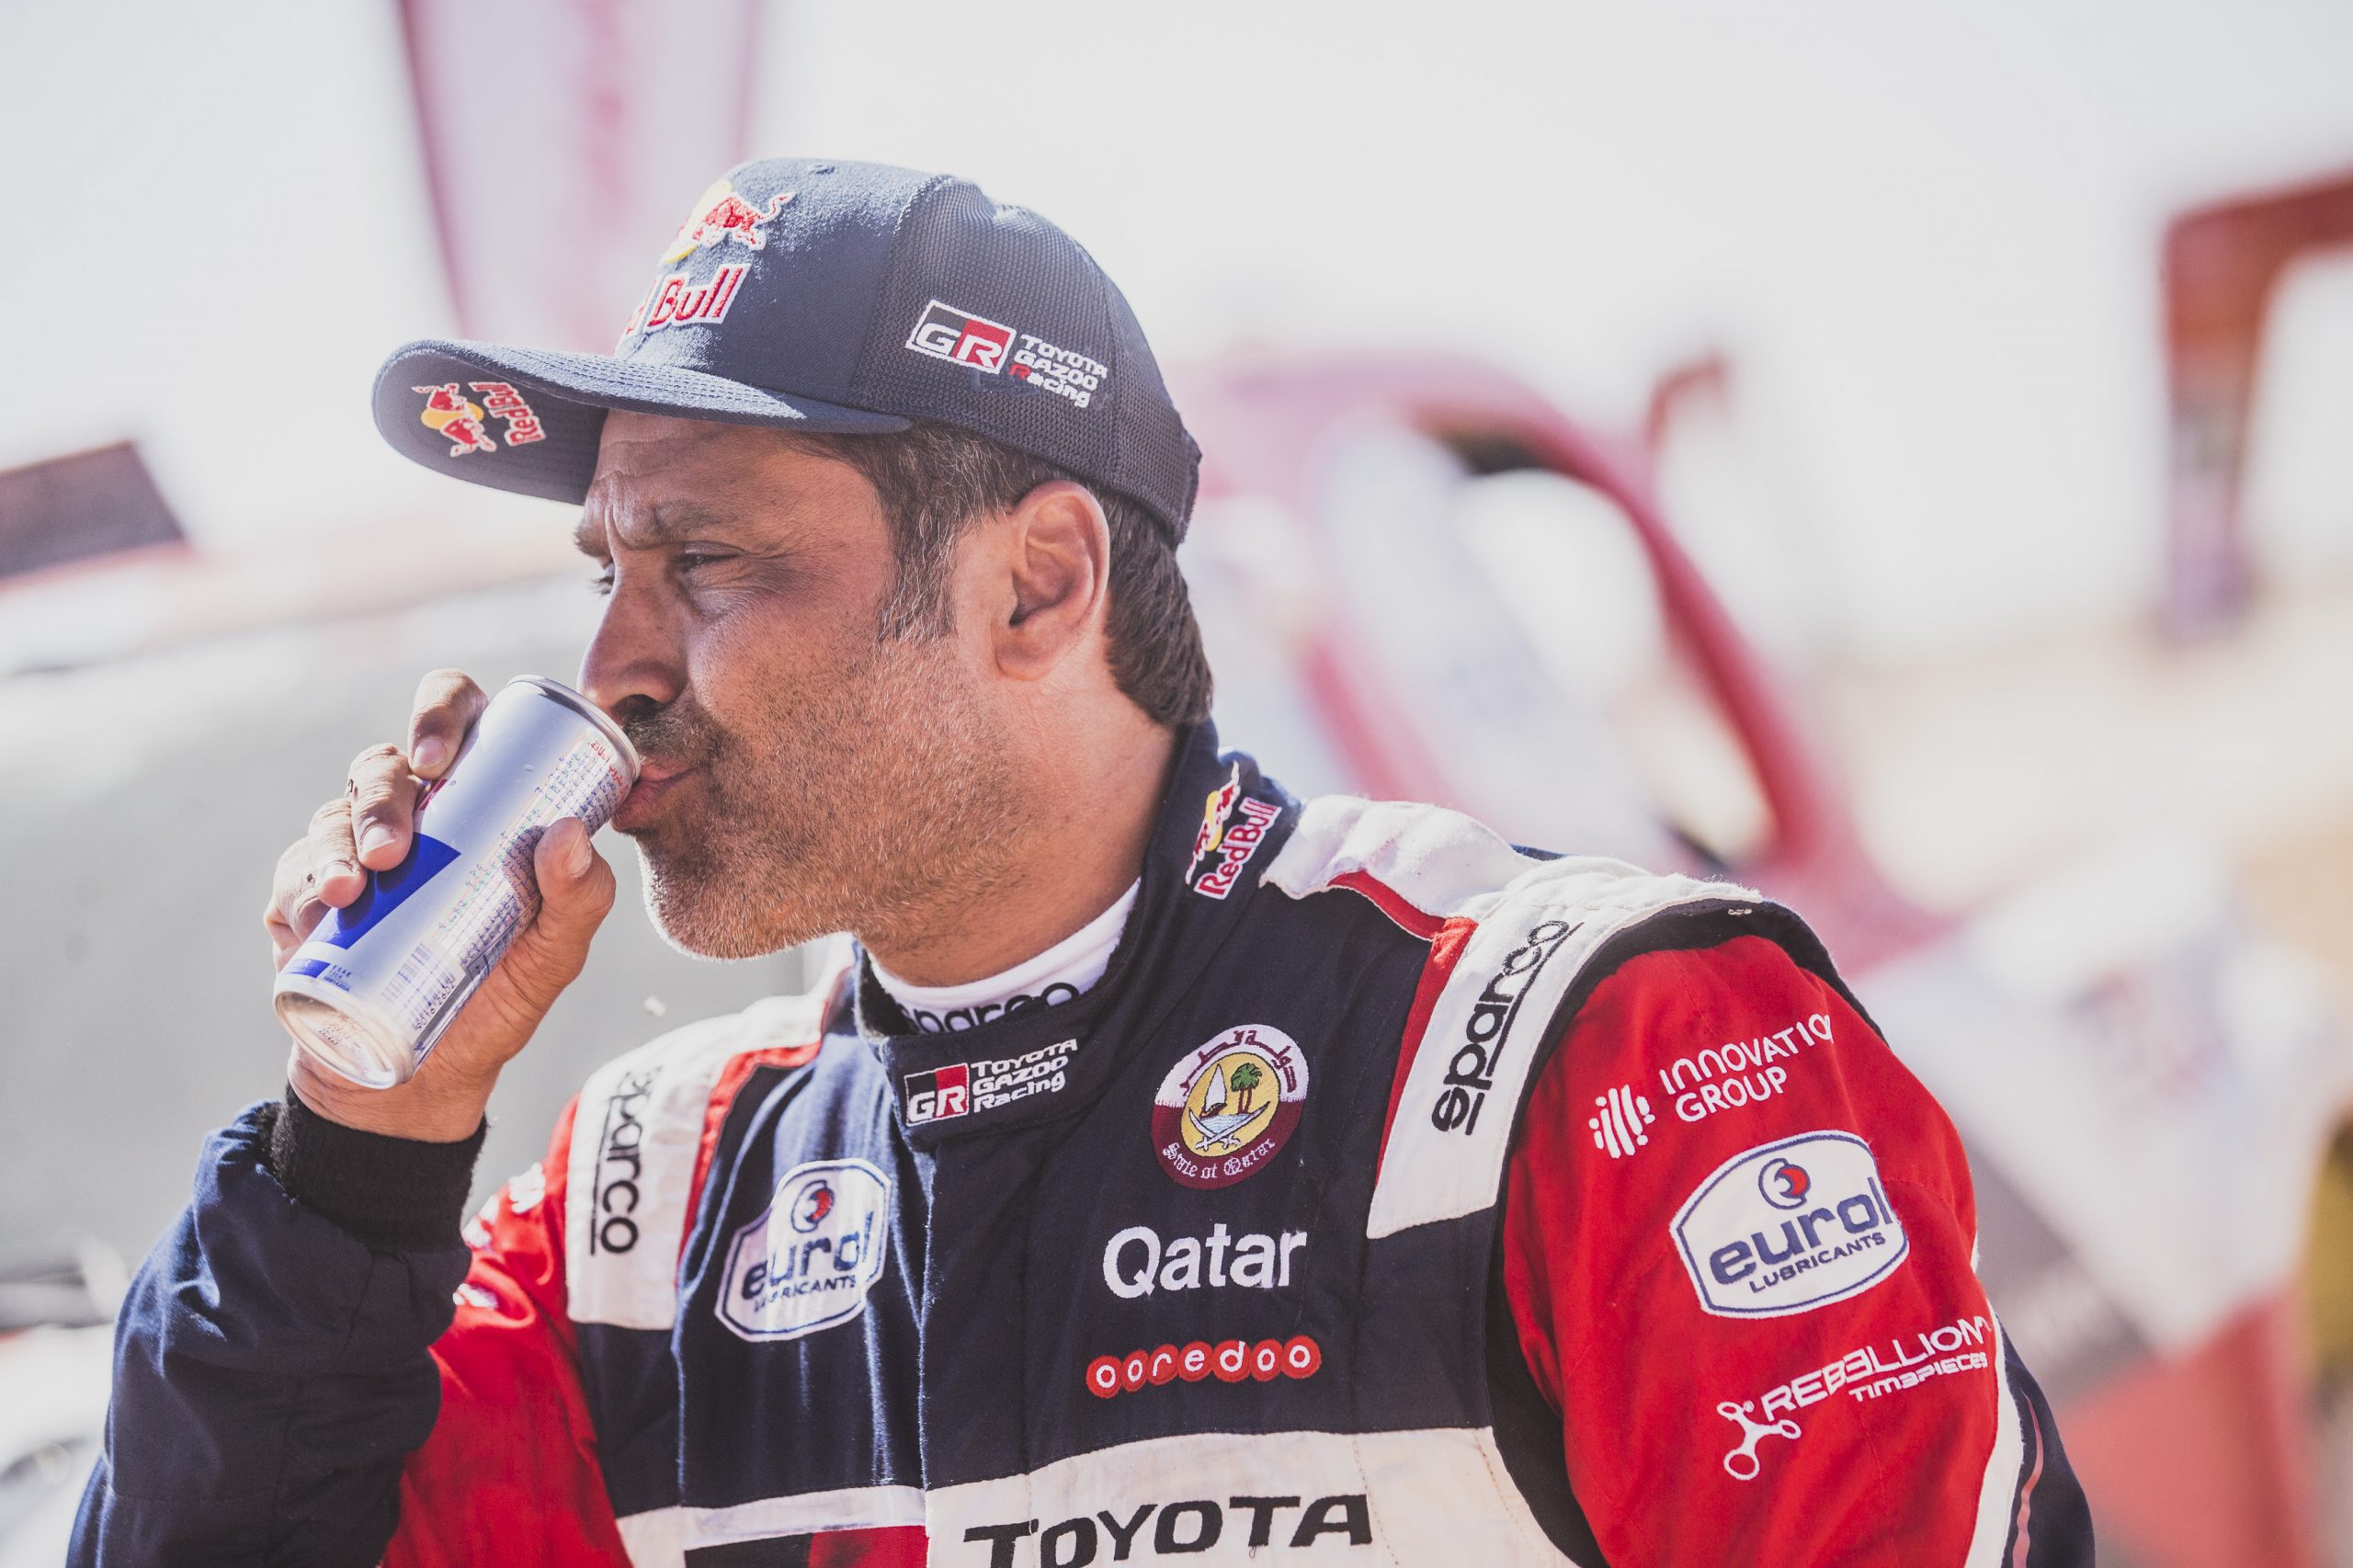 Dakar Rally: Al Attiyah Maintains Leadership After Conclusion of Ninth Stage